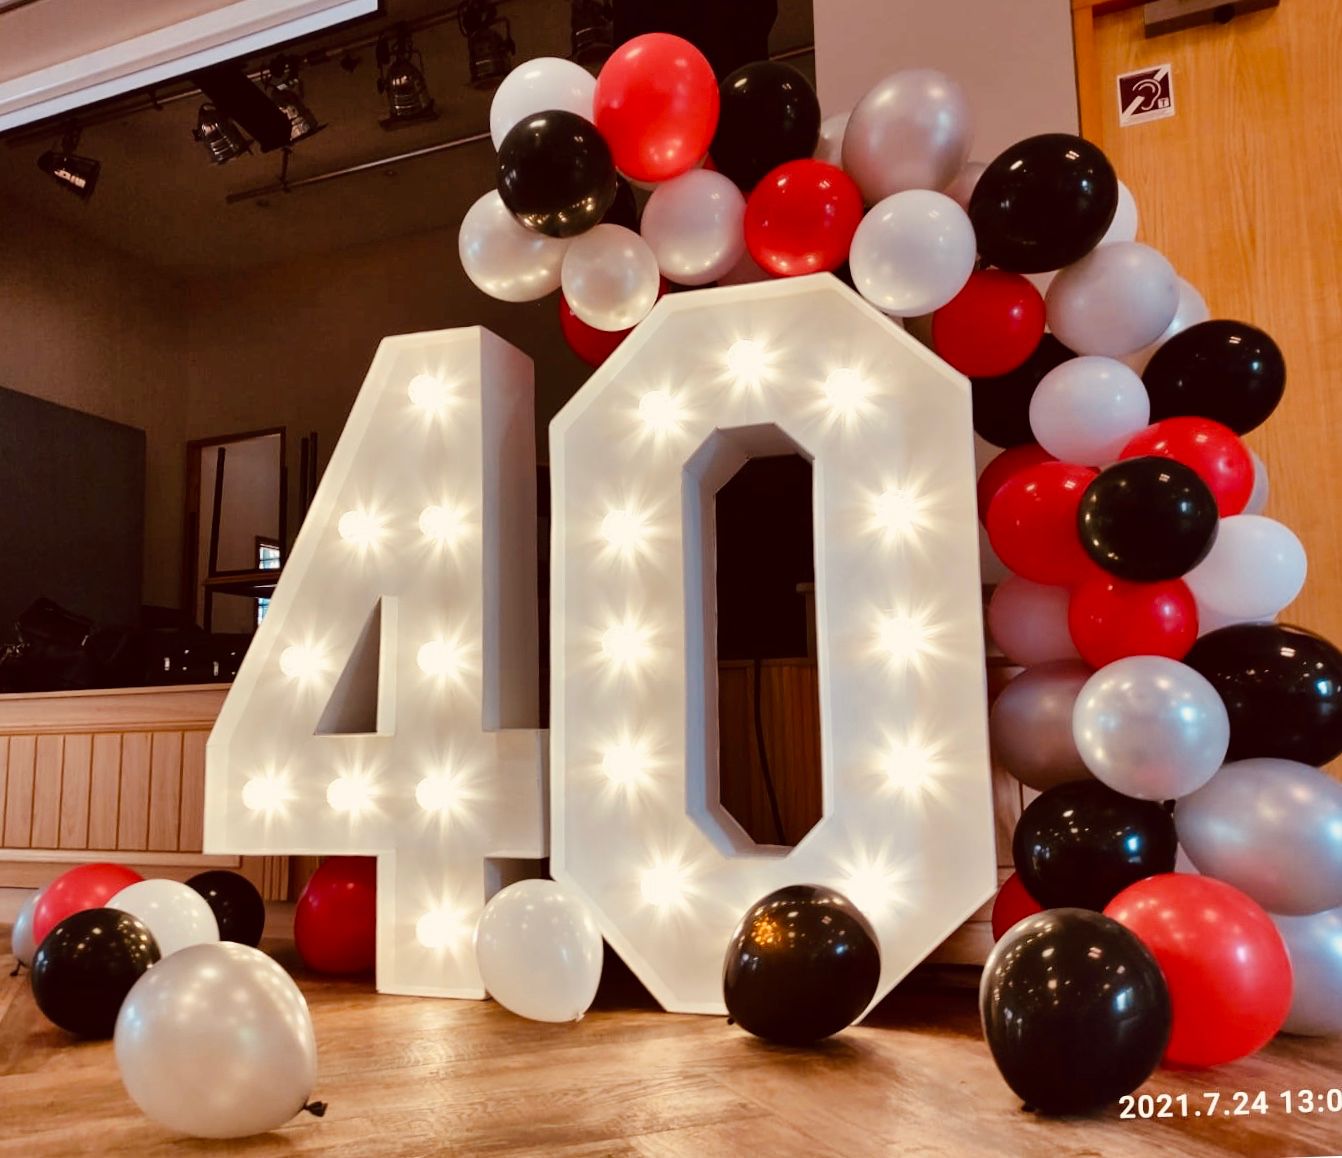 Big LED letters spelling out 40, surrounded by balloons